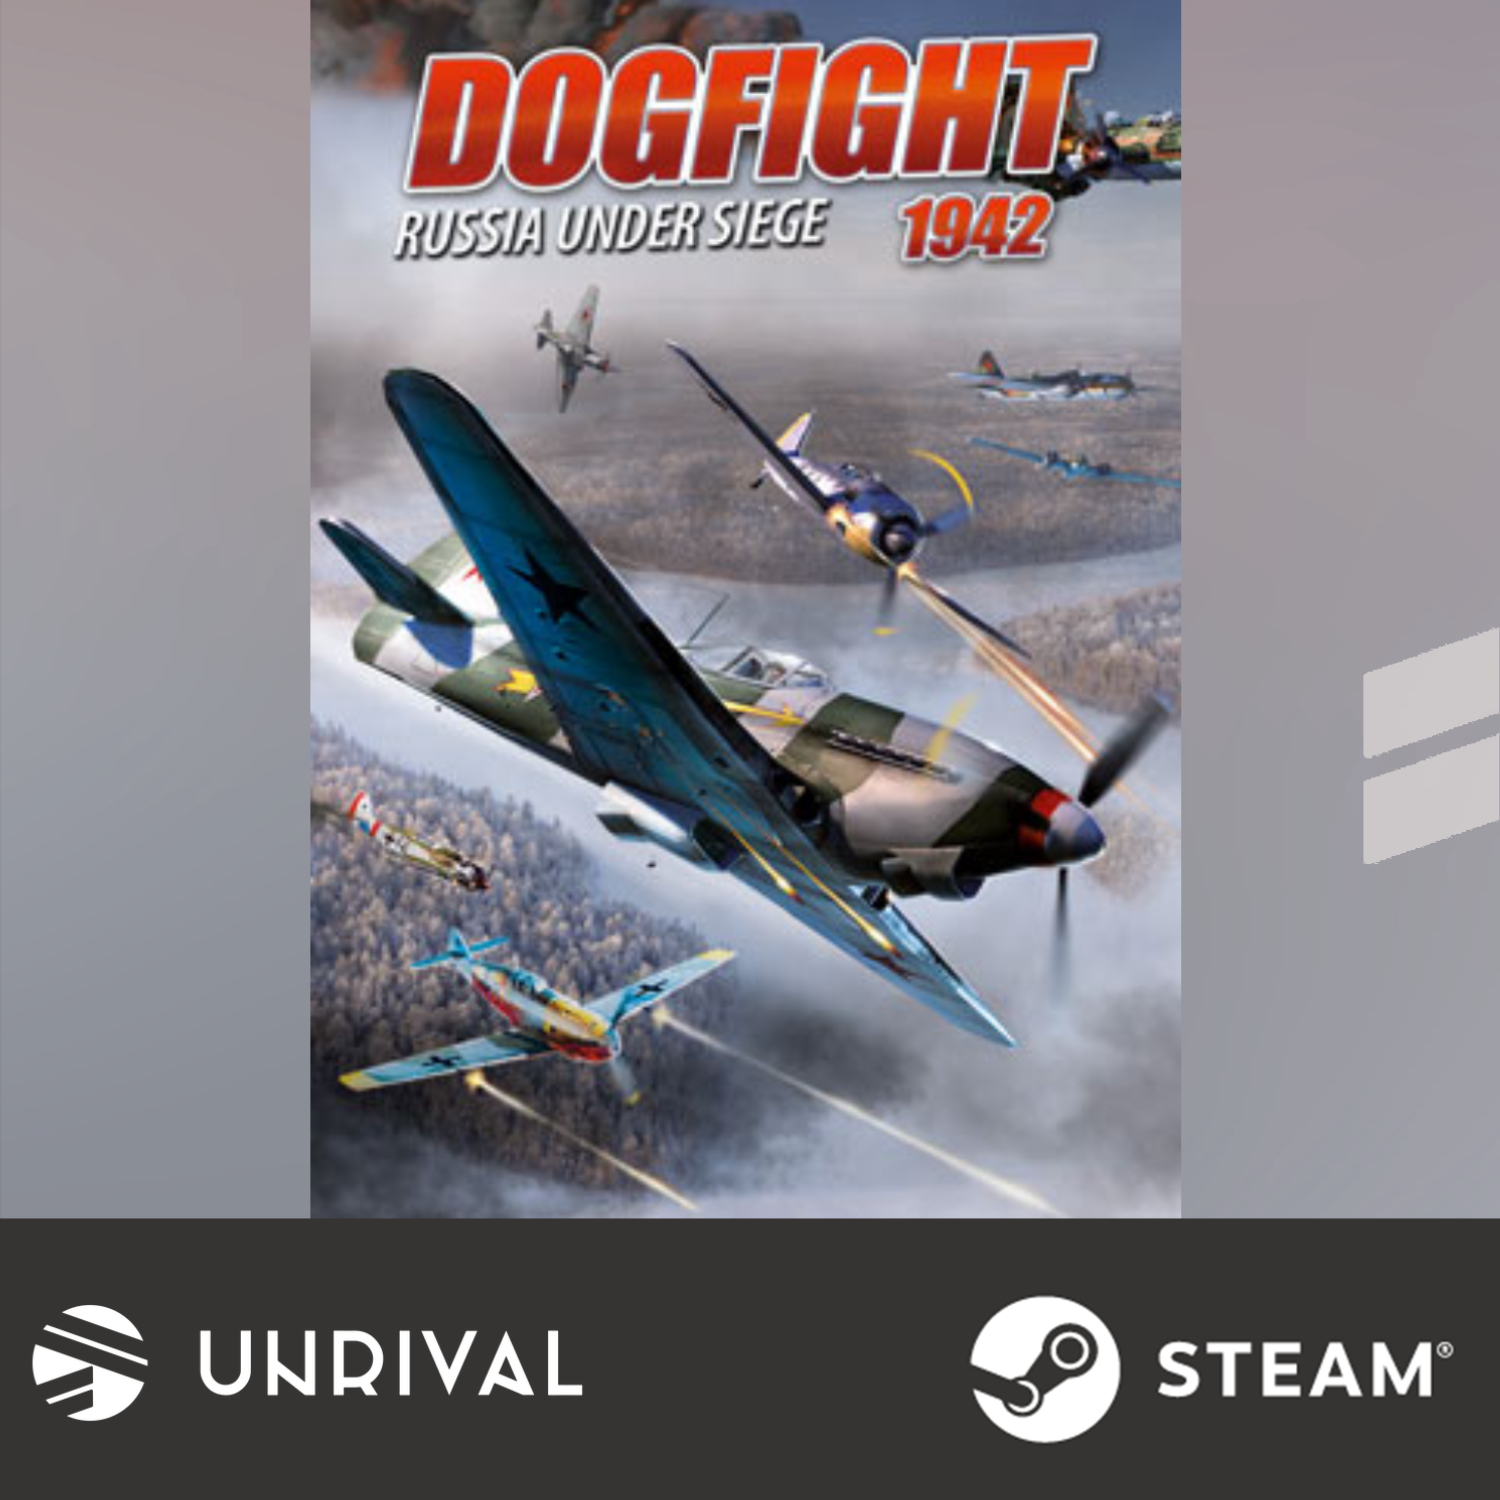 Dogfight 1942 - Russia Under Siege (DLC) PC Digital Download Game - Unrival